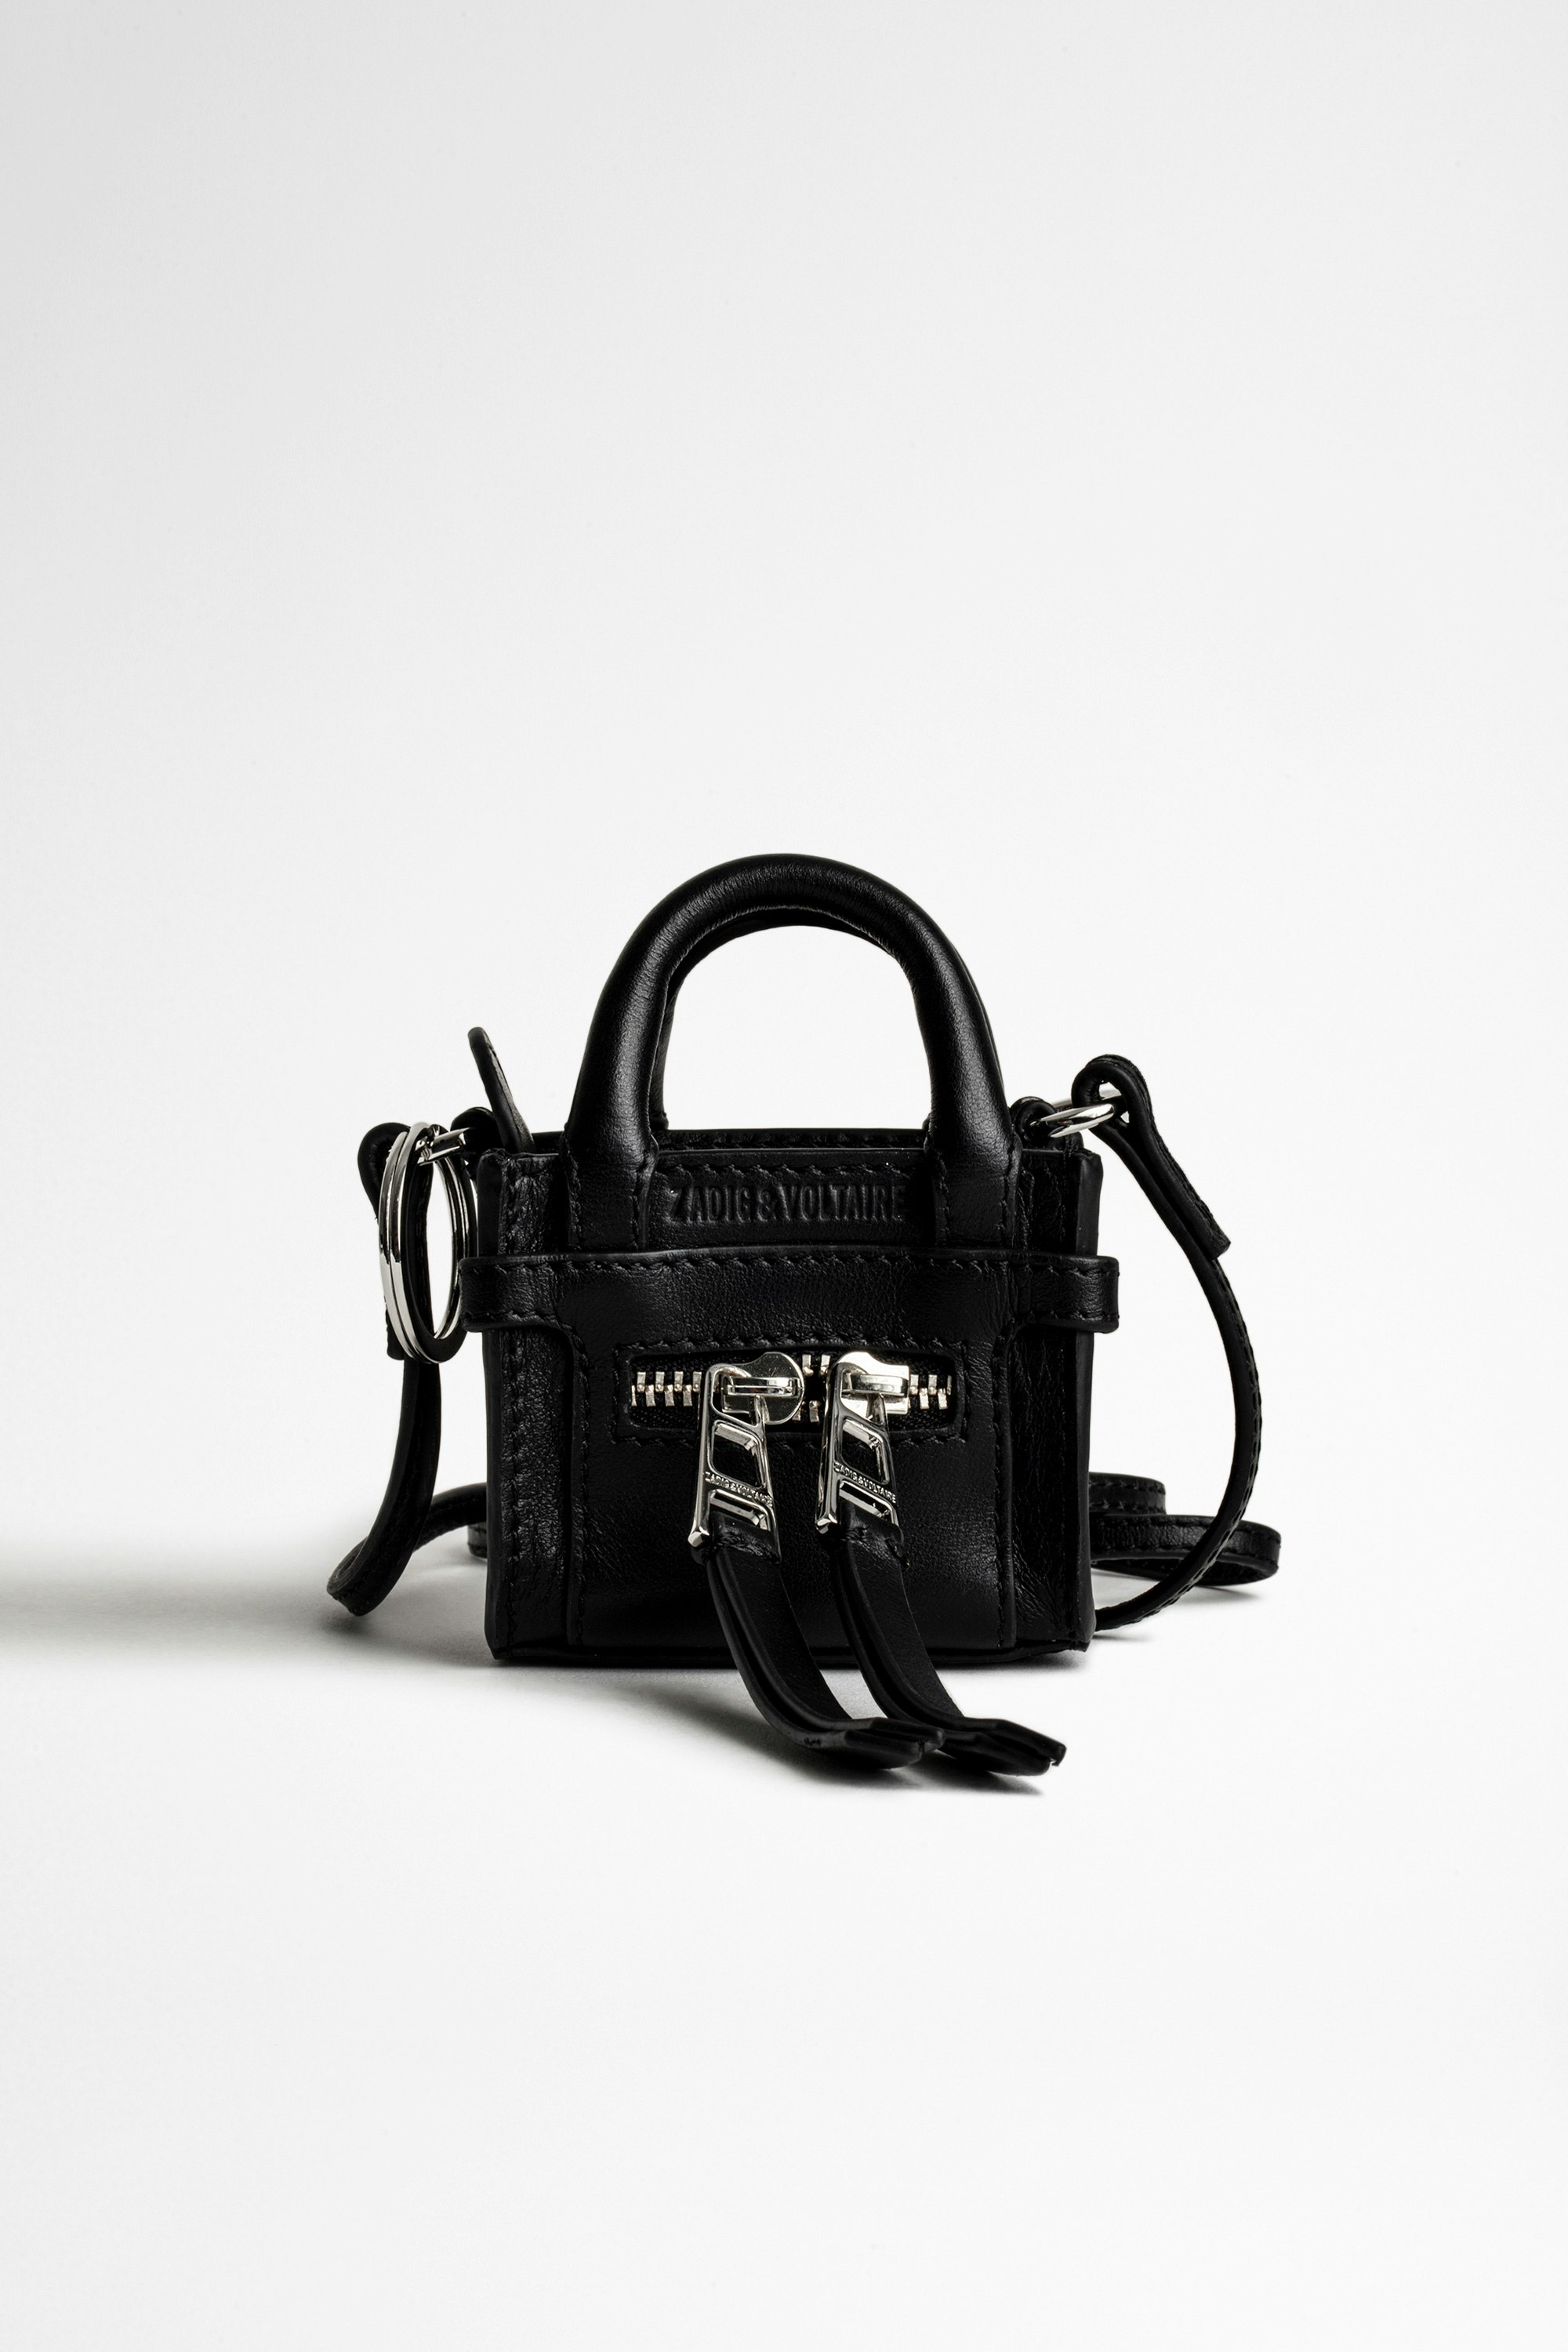 Smooth Leather Candide Grigri Bag Miniature black leather version of the Candide bag